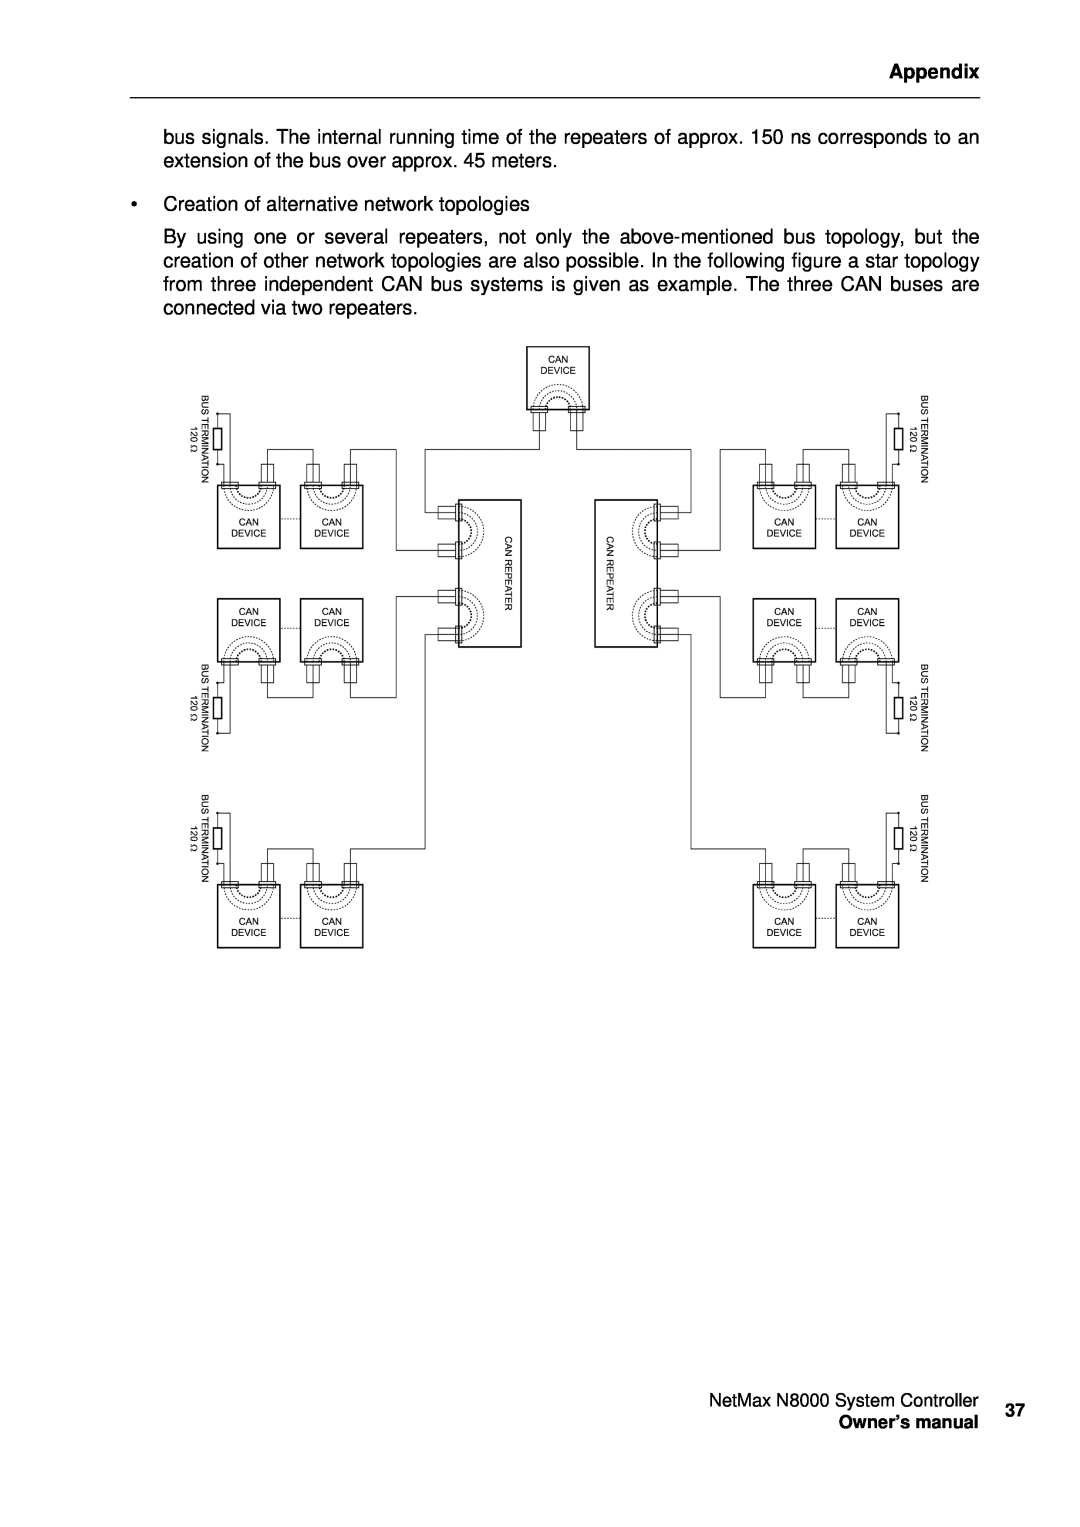 Electro-Voice NetMax N8000 owner manual Appendix, Creation of alternative network topologies 